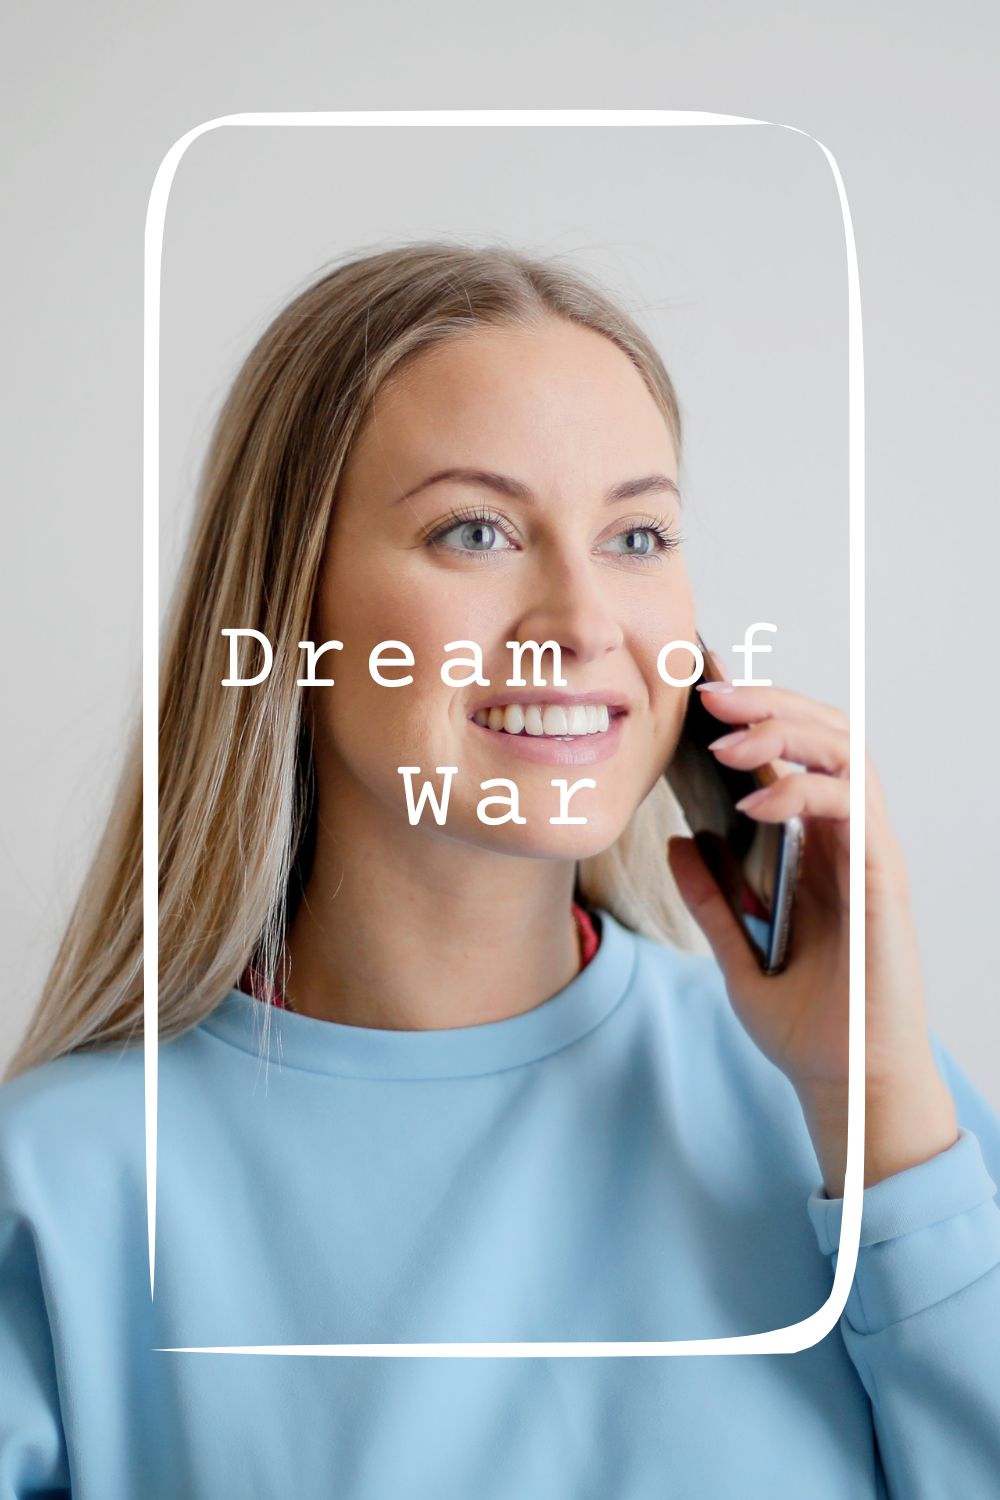 10 Dreaming of Receiving Call Or Calling Someone Meanings